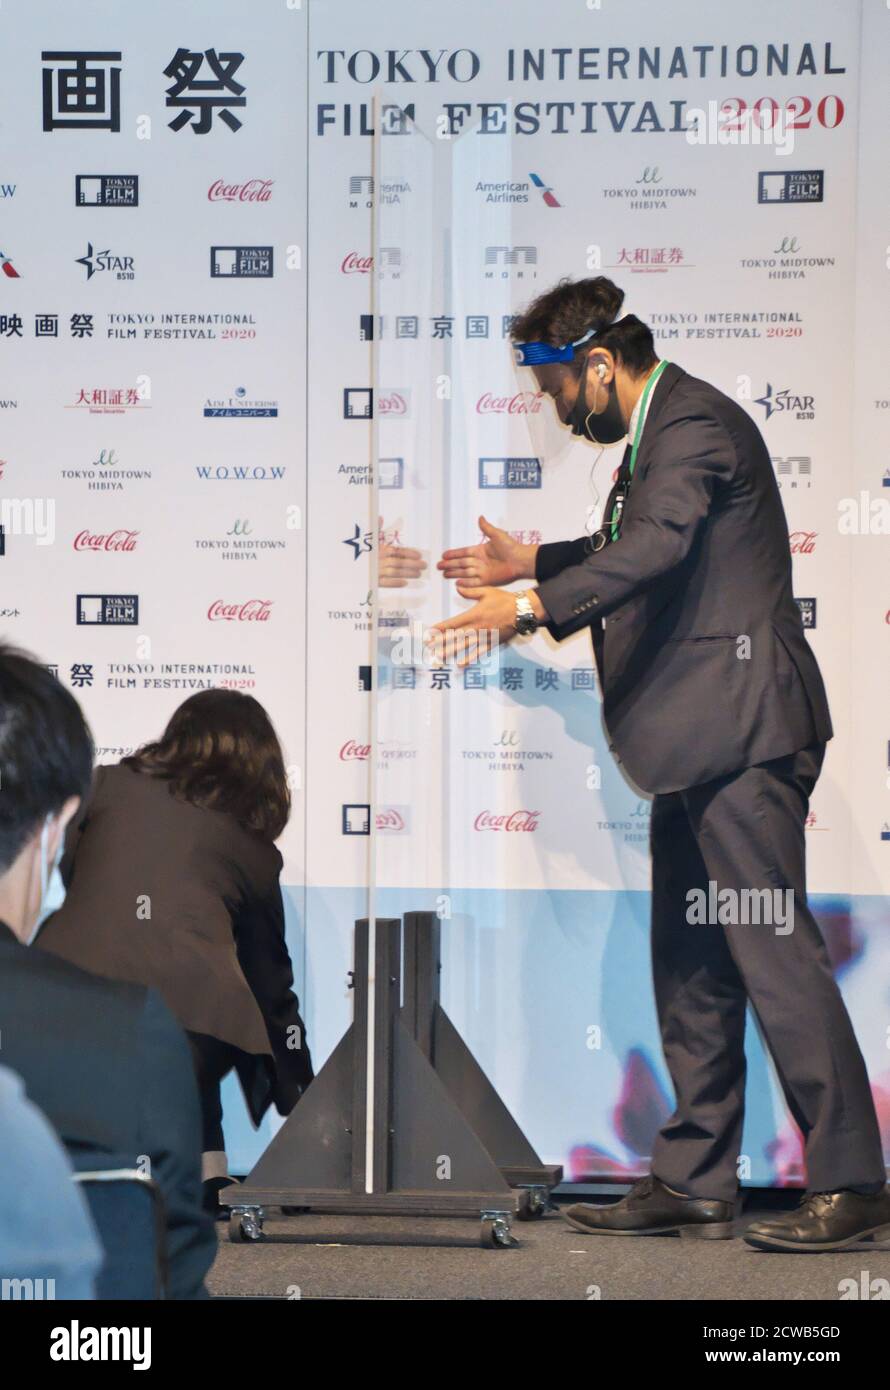 Staff member sets the acrylic board on the stage during the press conference for the Tokyo International Film Festival 2020 in Tokyo, Japan on Tuesday, September 29, 2020. This year's Tokyo festival is held on October 31st to November 9th collaborate with Tokyo Filmex. 25 films are world premieres, and the remaining seven films Asian premieres in this event.     Photo by Keizo Mori/UPI Stock Photo